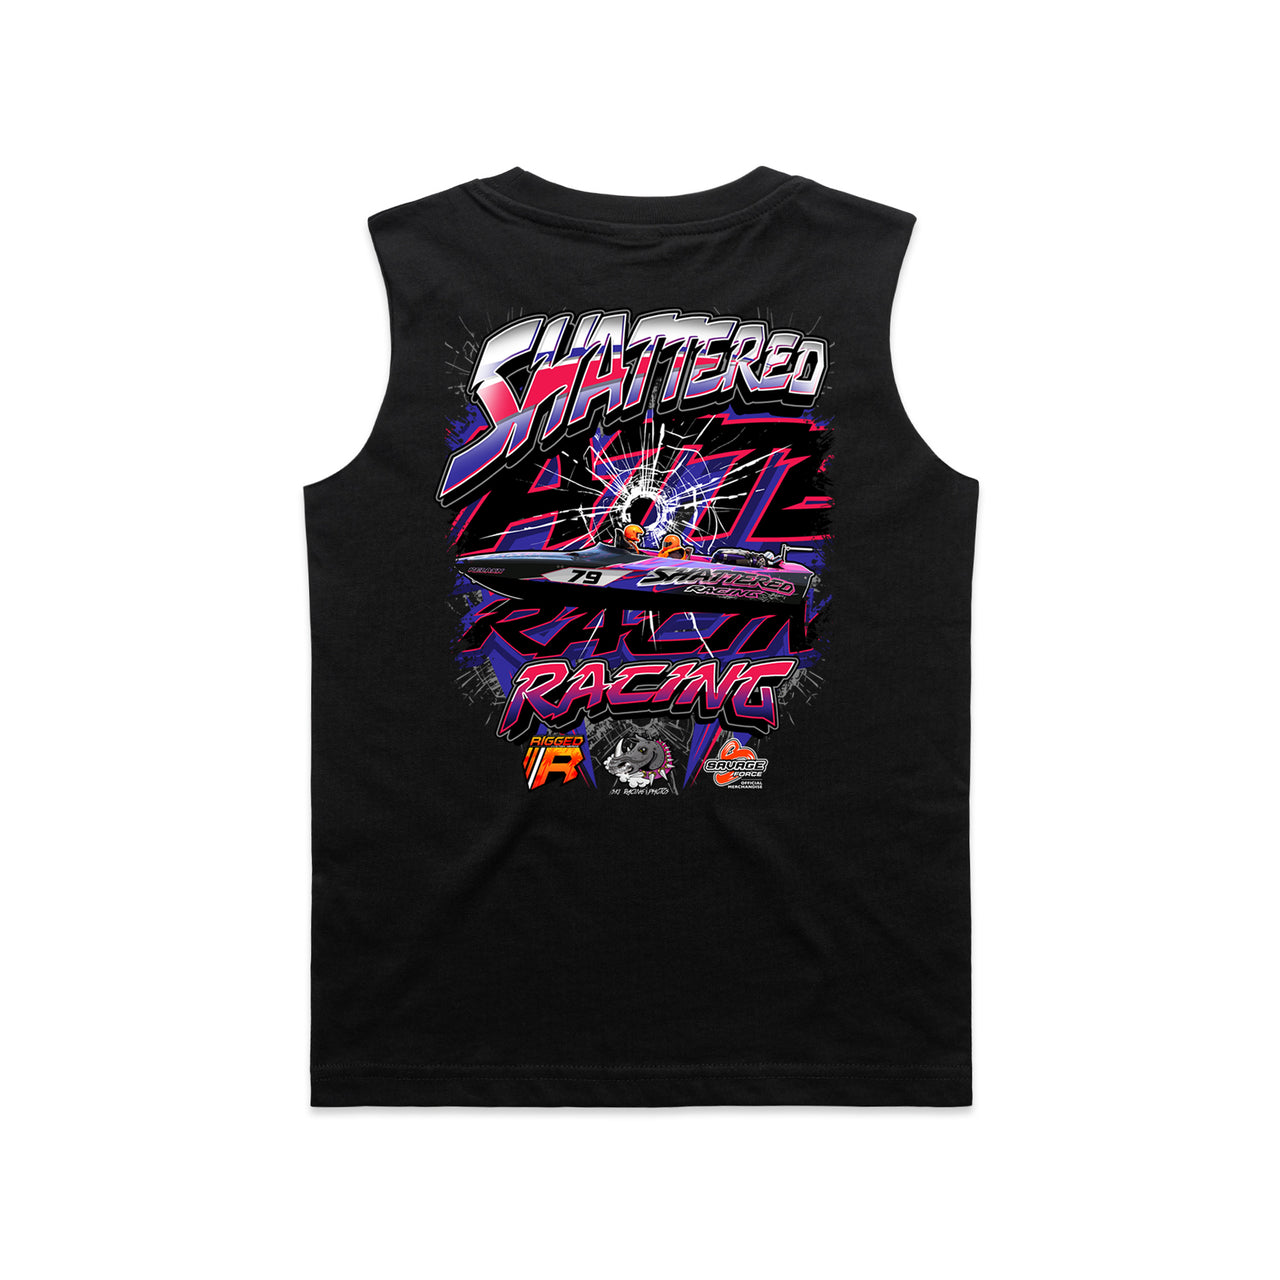 Shattered Racing Team Youth/Kids Tank